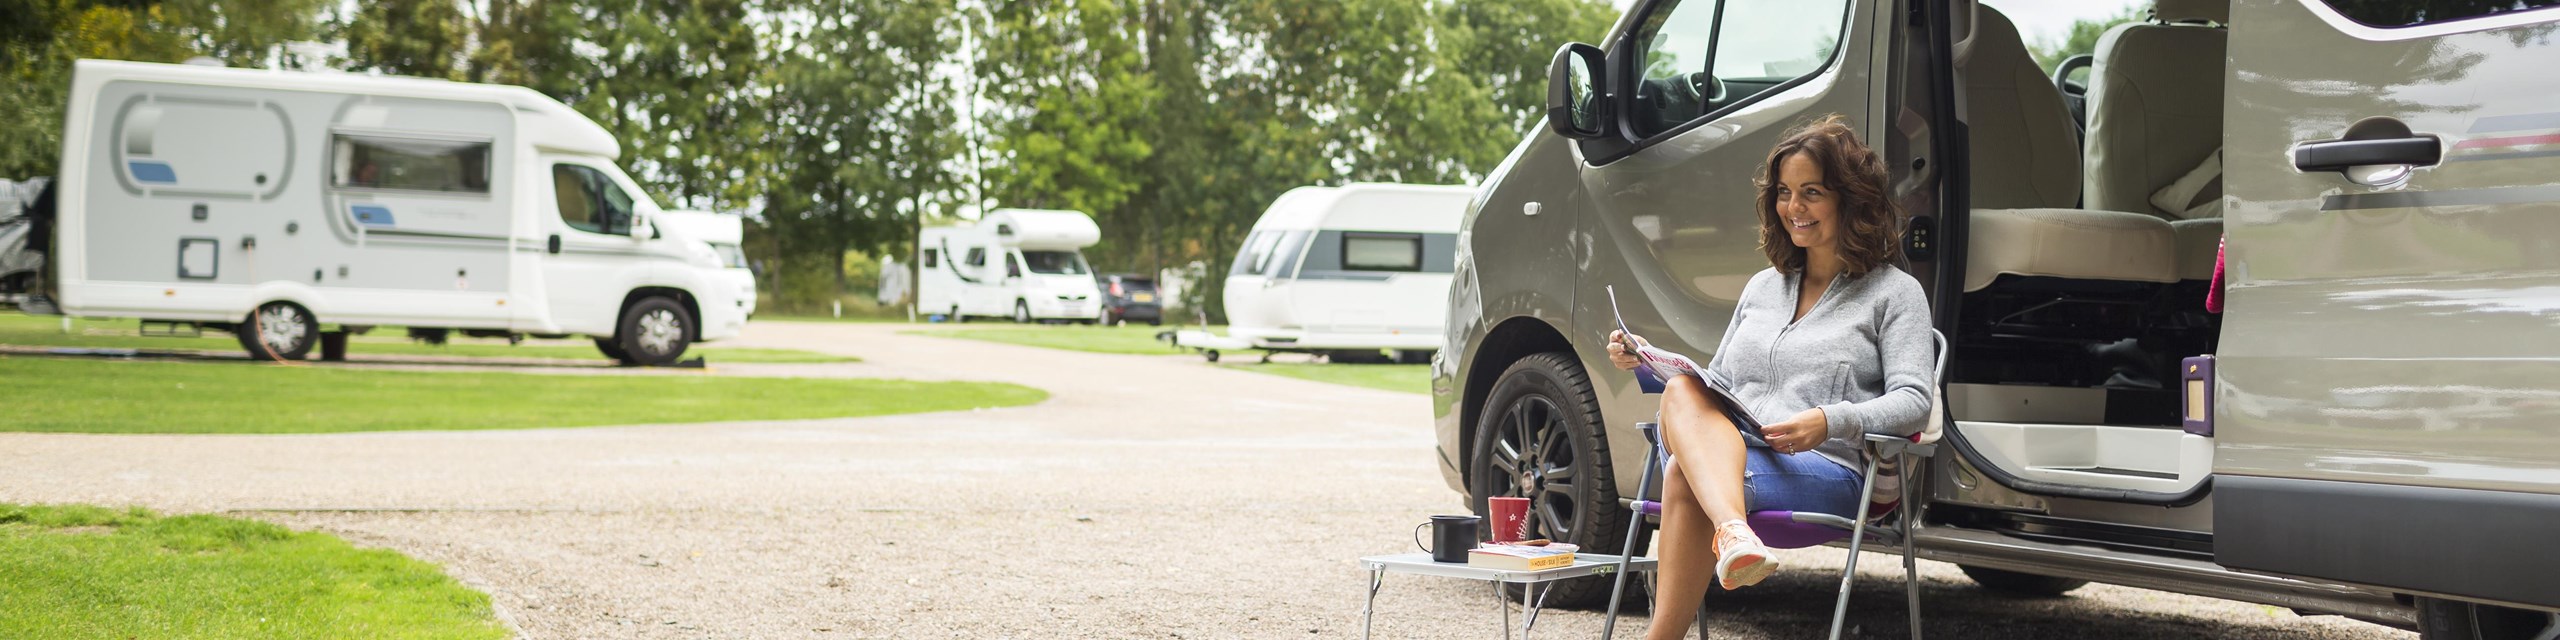 Our Member Services - The Camping and Caravanning Club - The Camping and Caravanning  Club